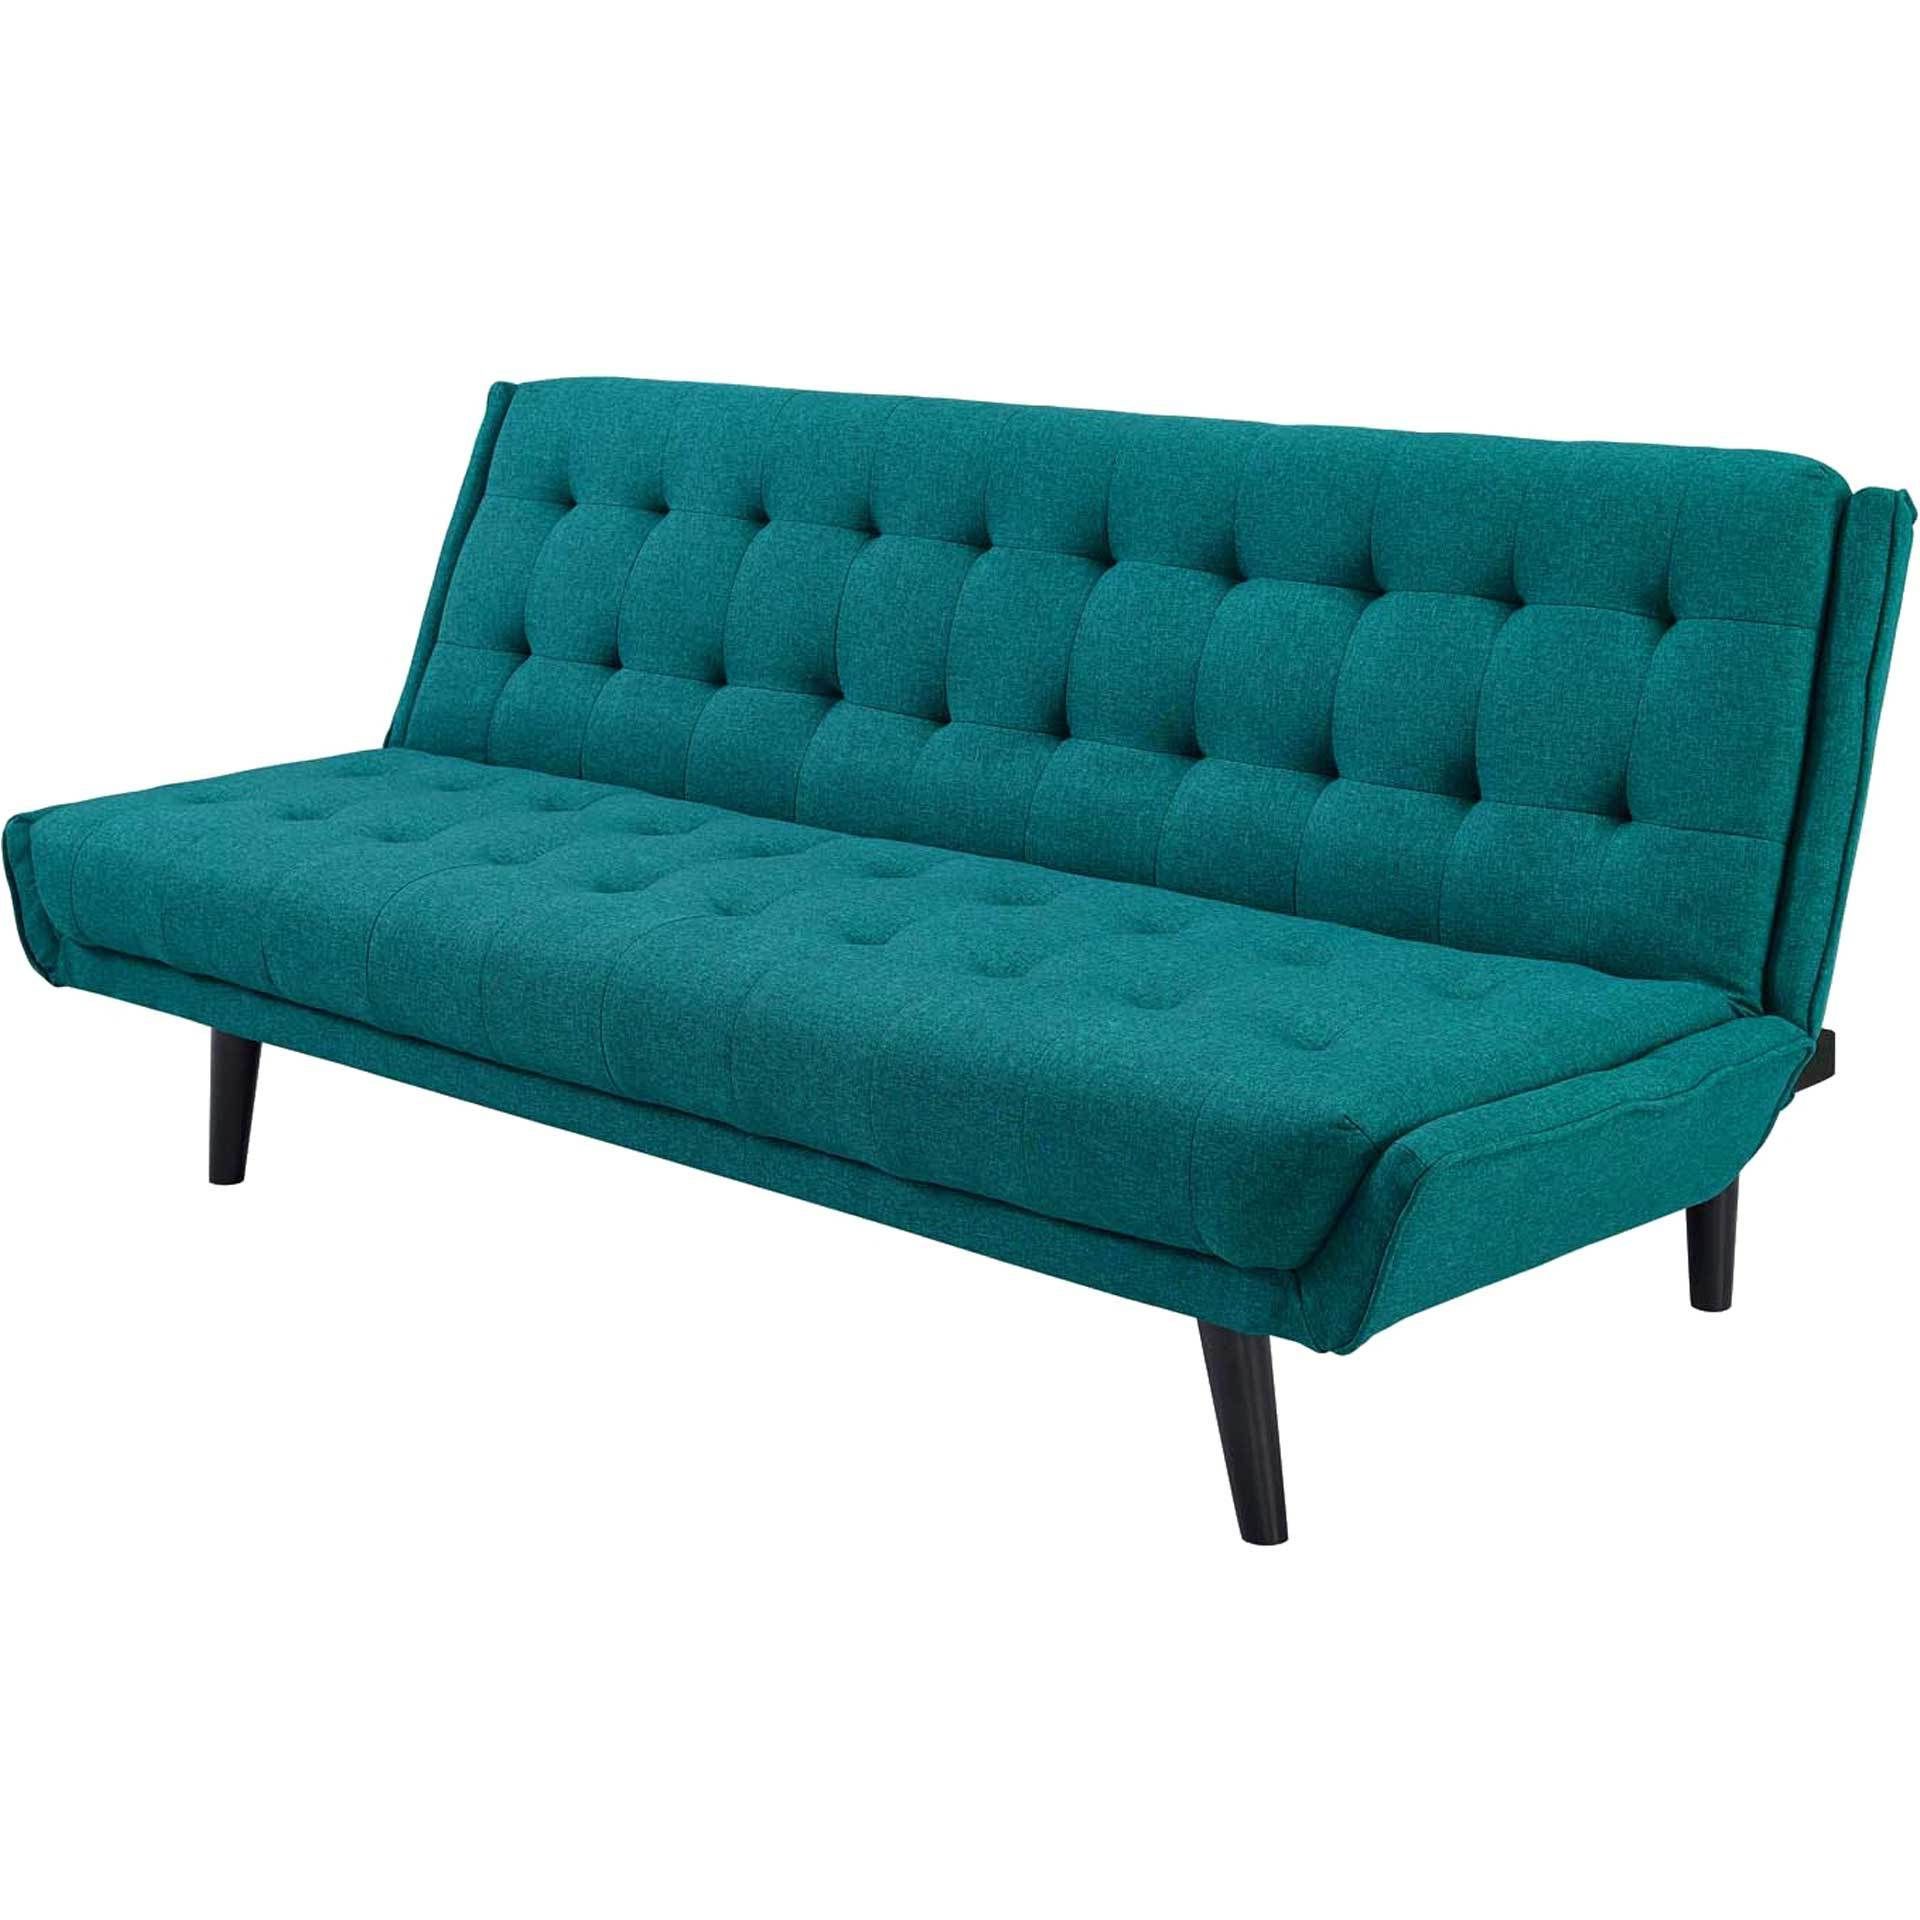 Gather Tufted Convertible Fabric Sofa Bed Teal (View 9 of 15)